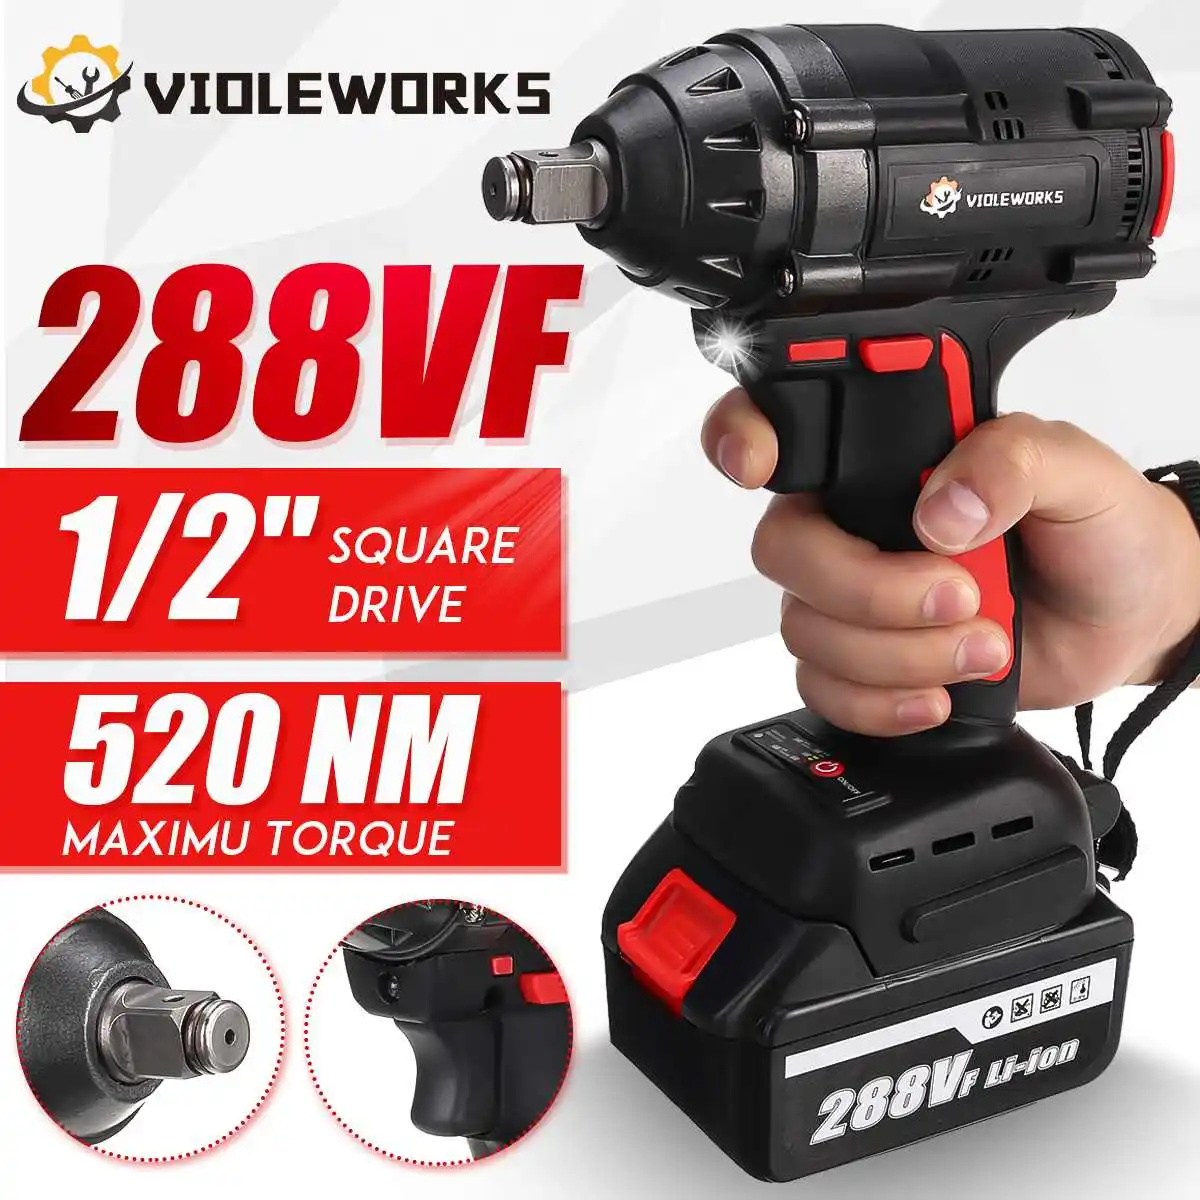 

NEW 19800mAh 288VF Brushless Electric Impact Wrench 1/2 Lithium-Ion Battery 6200rpm 520 N.M Torque 110-240V For Makita Battery